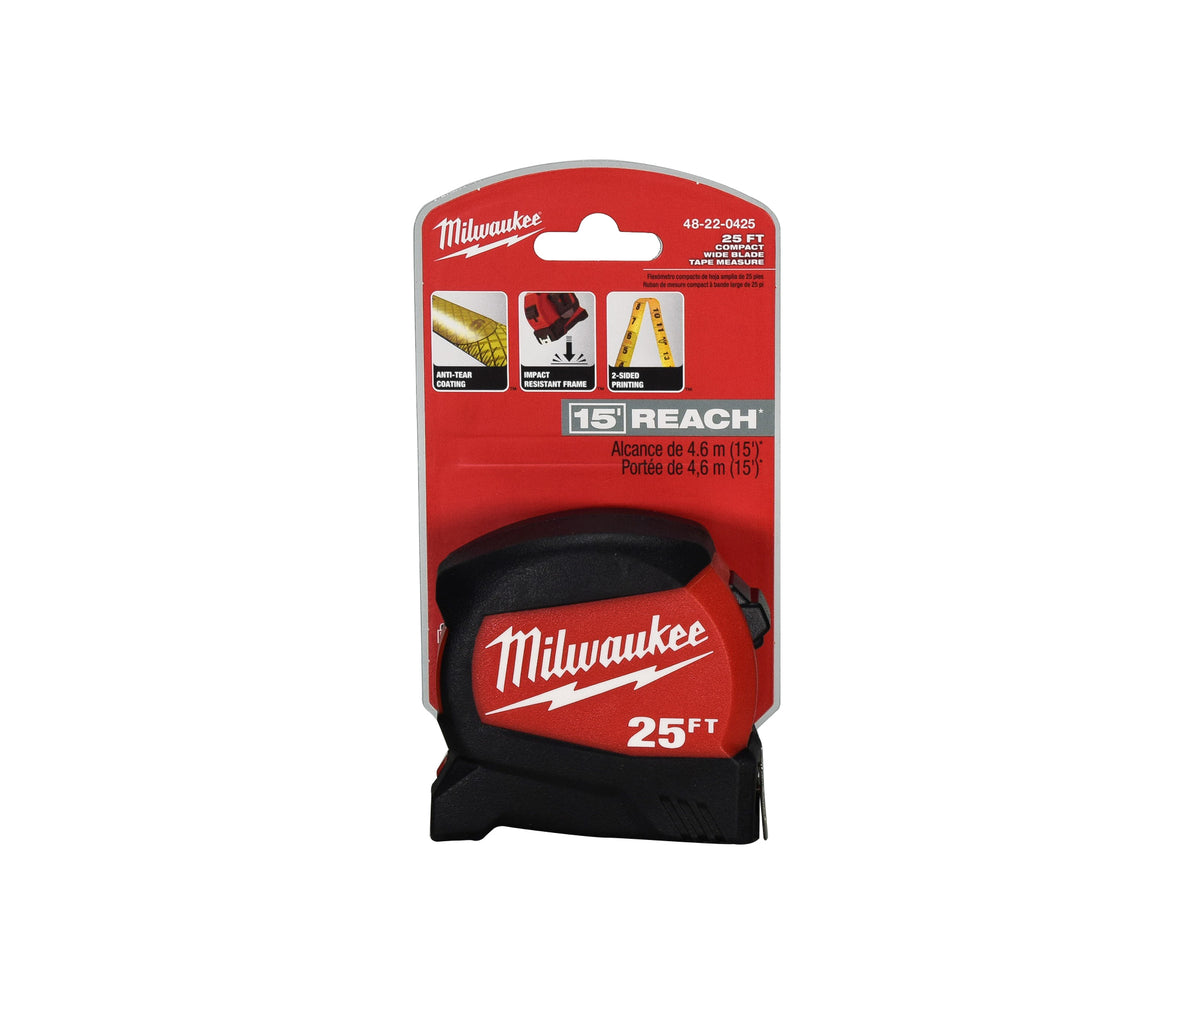 Milwaukee 48-22-0425 25 ft. x 1-3/16 in. Compact Wide Blade Tape Measure with 15 ft. Reach